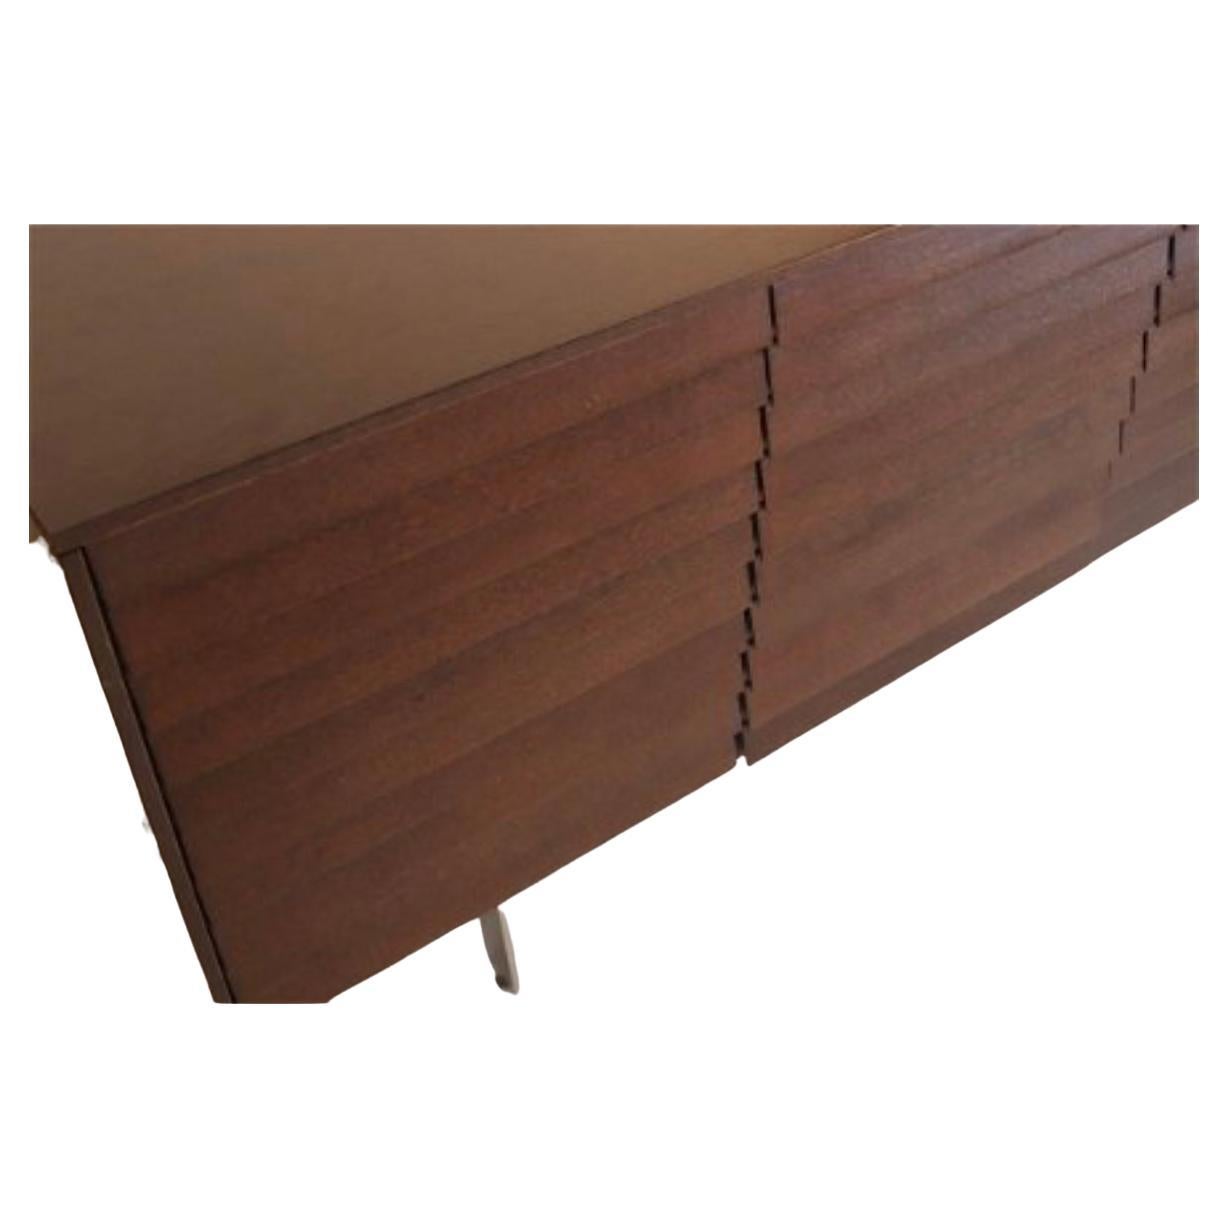 Pre owned Modern Sussex Walnut Credenza Sideboard designed By Terence Woodgate made by Punt Mobles. Dark walnut finish credenza with 4 louver front doors. Sits on 4 steel chrome plated flat bar legs. Has multiple adjustable shelves and plenty of